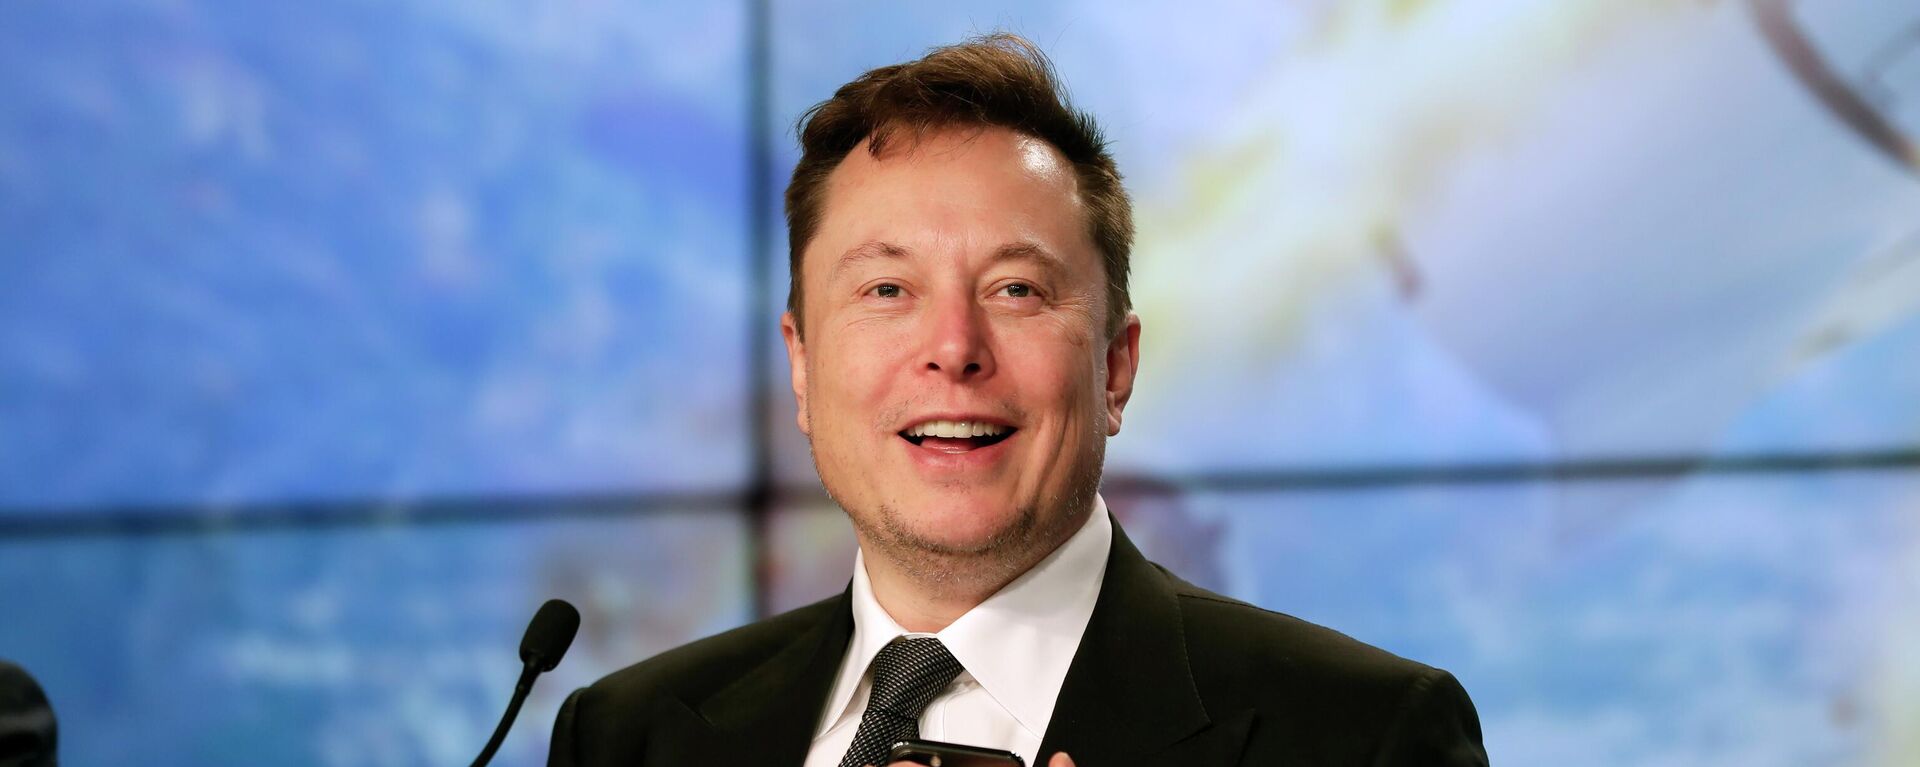 Elon Musk founder, CEO, and chief engineer/designer of SpaceX speaks during a news conference after a Falcon 9 SpaceX rocket test flight at the Kennedy Space Center in Cape Canaveral, Fla, Jan. 19, 2020. - Sputnik International, 1920, 30.04.2022